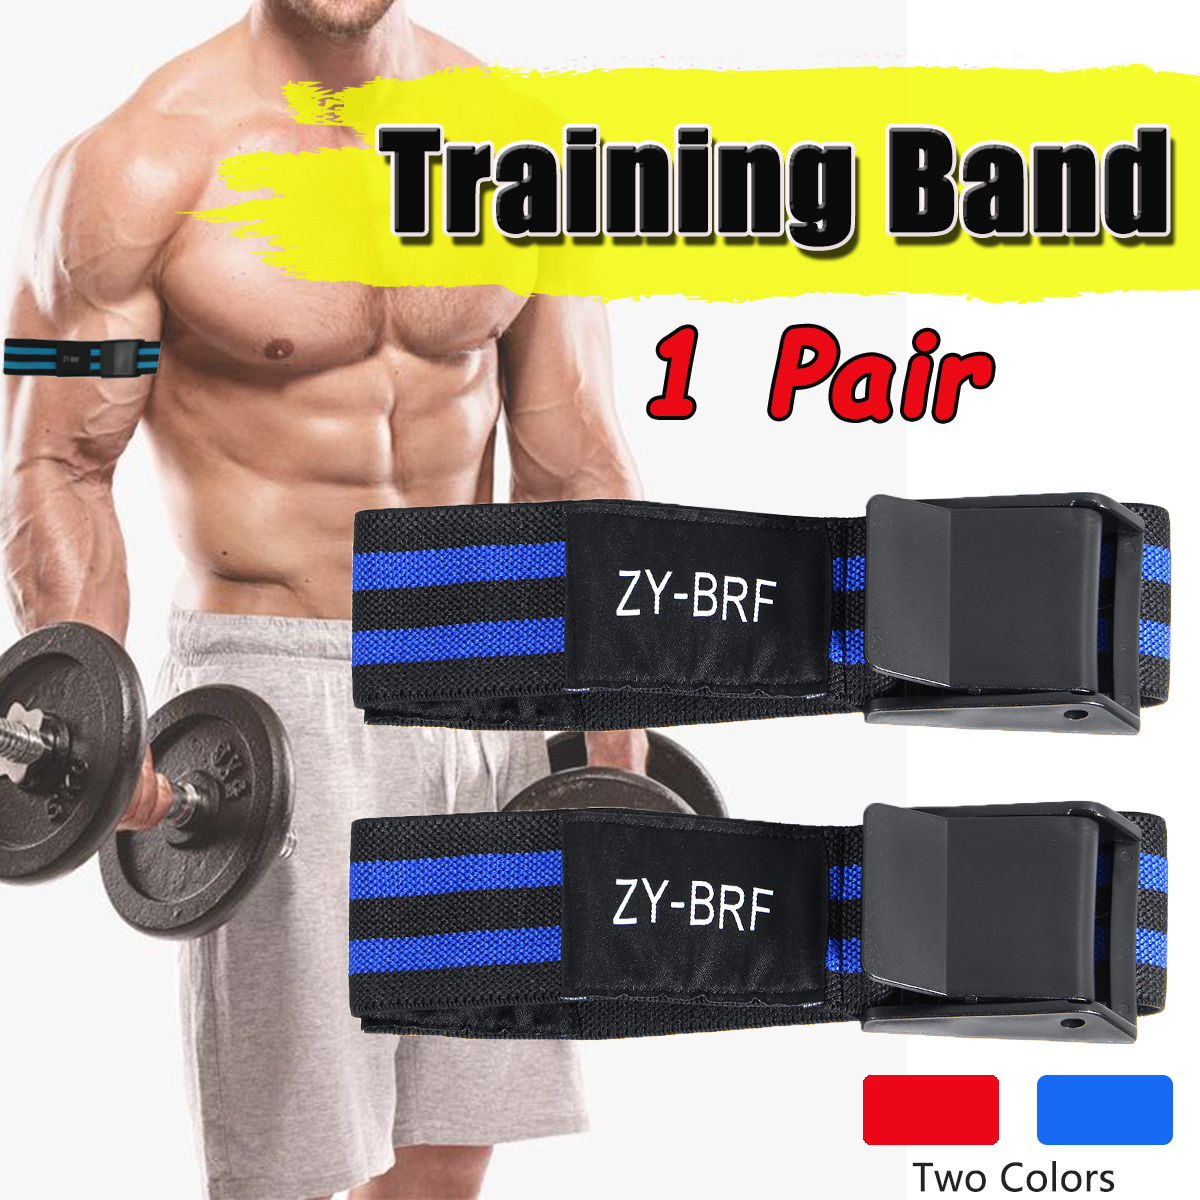 2 Pcs Bands Occlusion Training Bands Restriction Bands